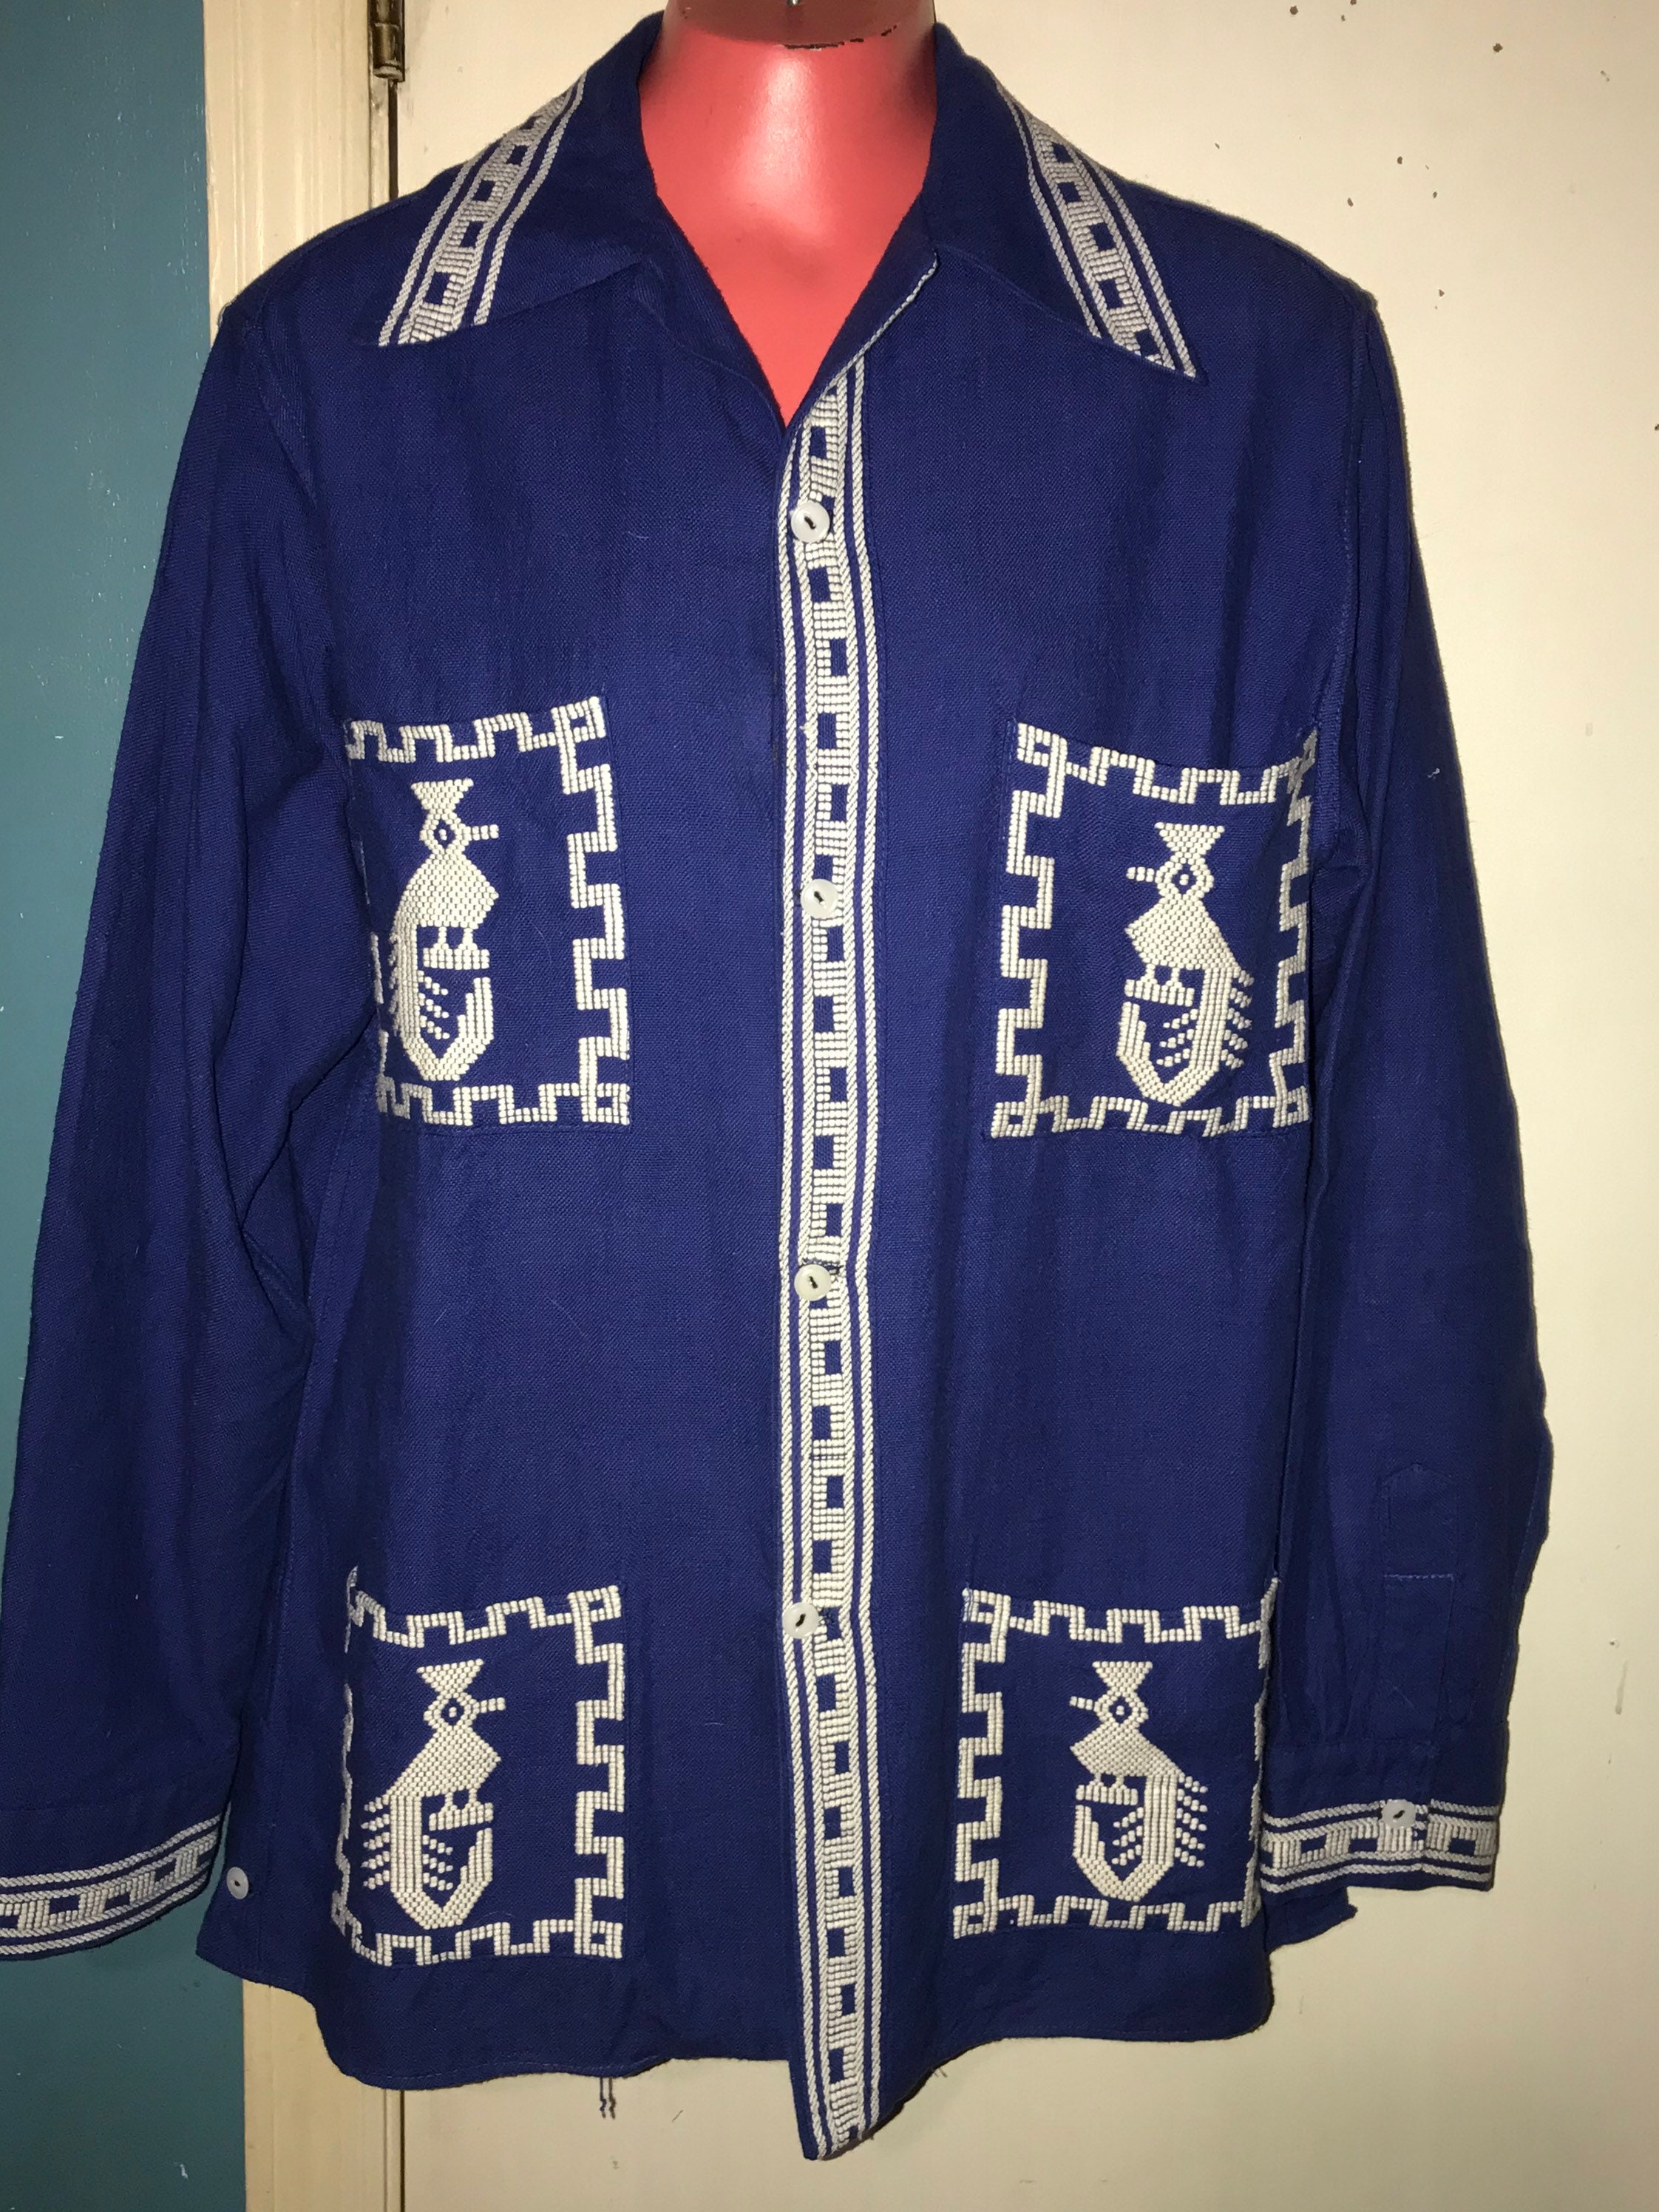 Vintage 1960s Mexican Embroidered Shirt. Mens Bohemian Blue and White ...